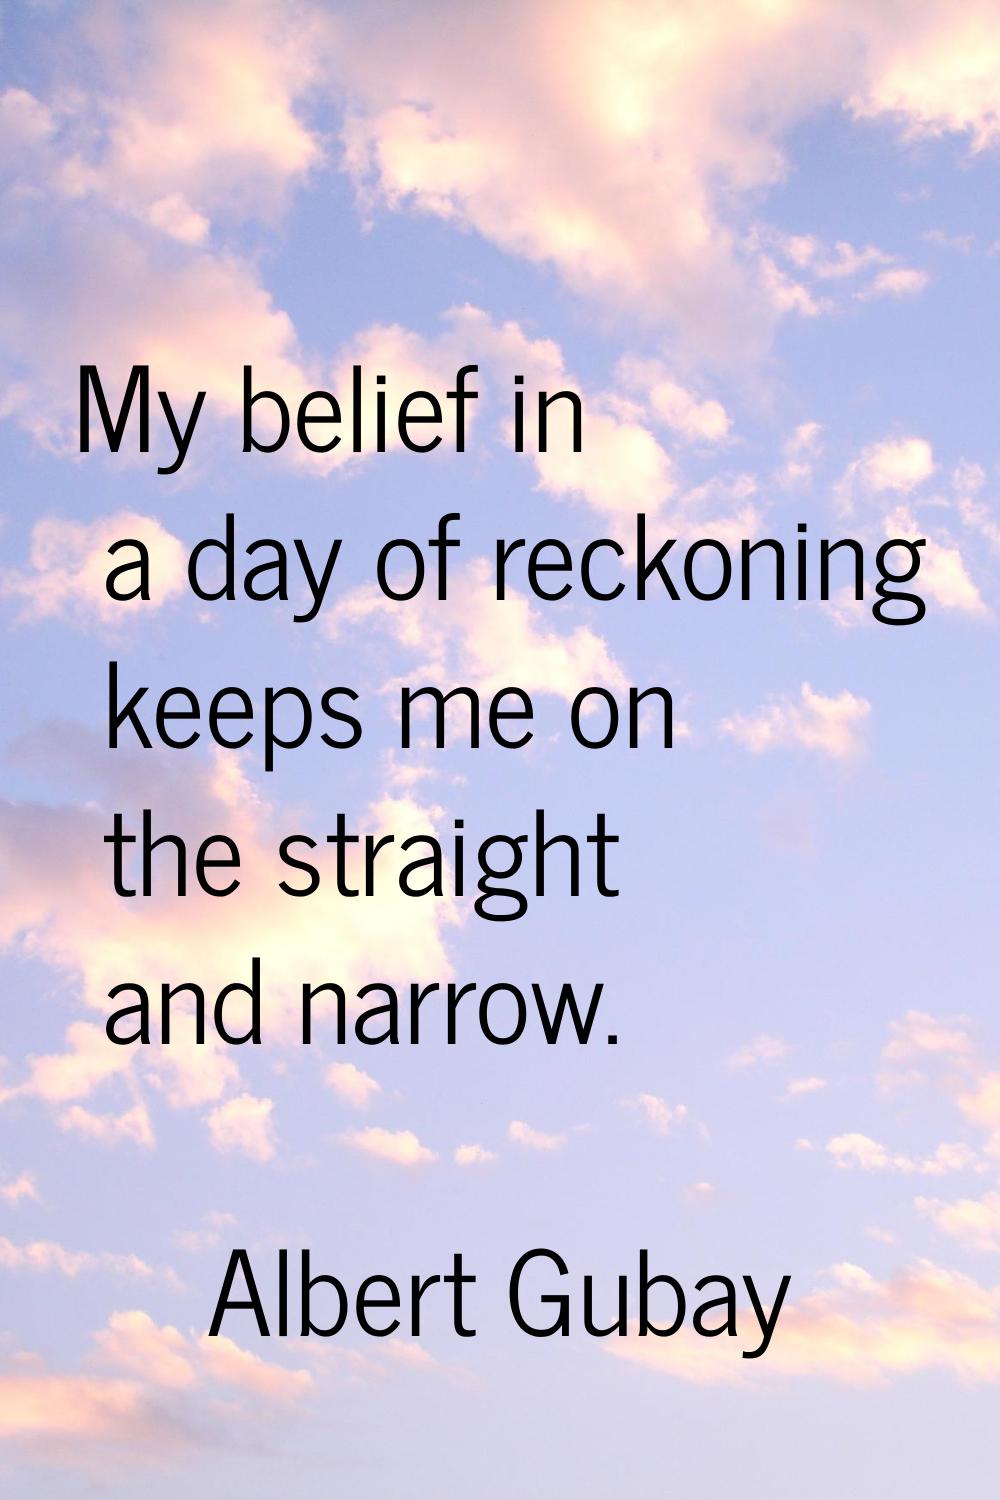 My belief in a day of reckoning keeps me on the straight and narrow.